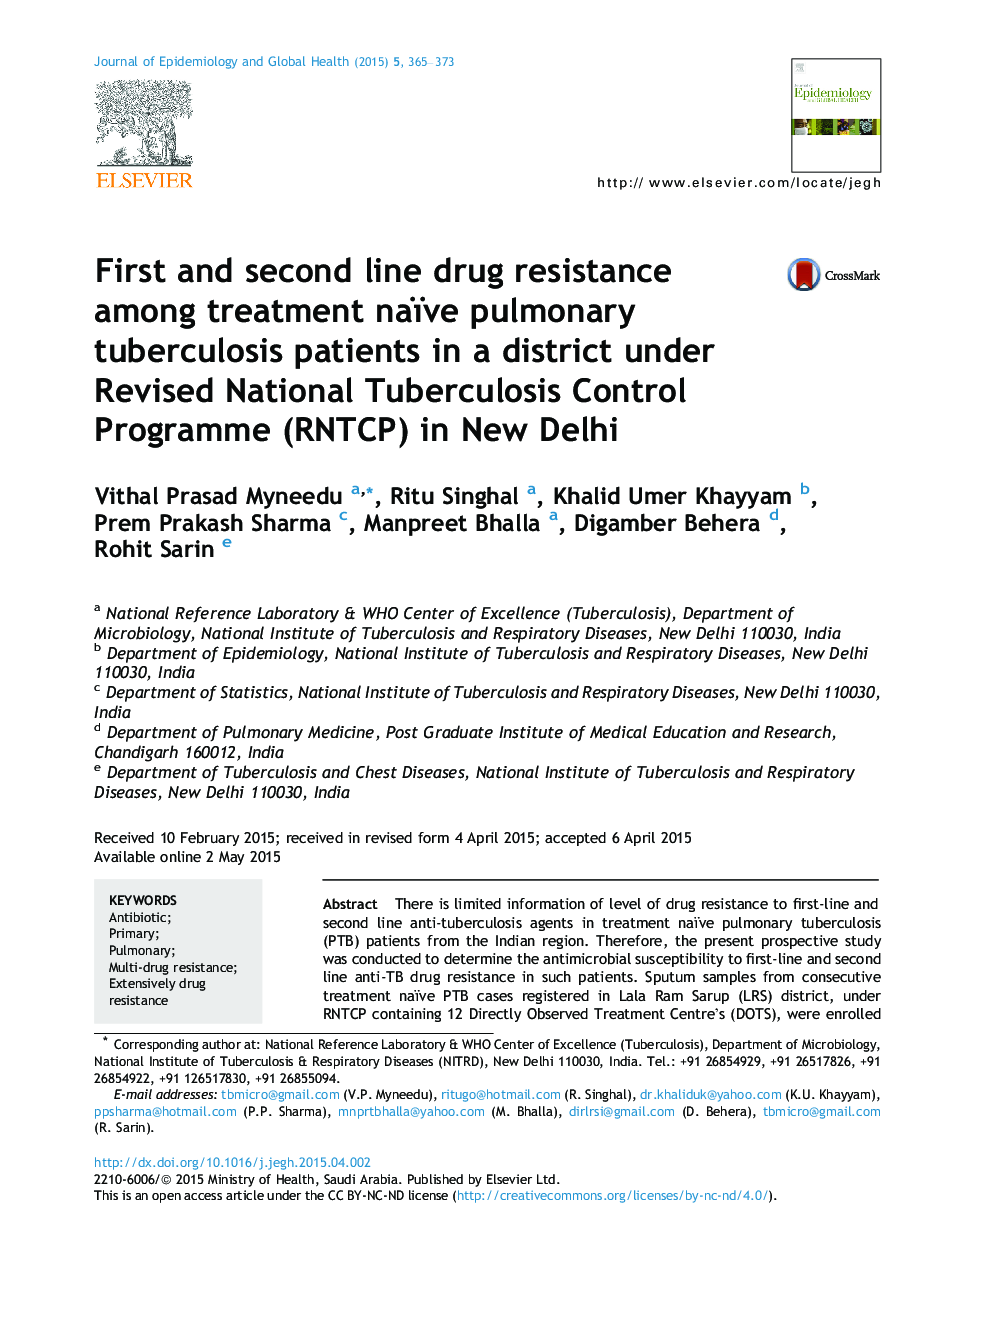 First and second line drug resistance among treatment naïve pulmonary tuberculosis patients in a district under Revised National Tuberculosis Control Programme (RNTCP) in New Delhi